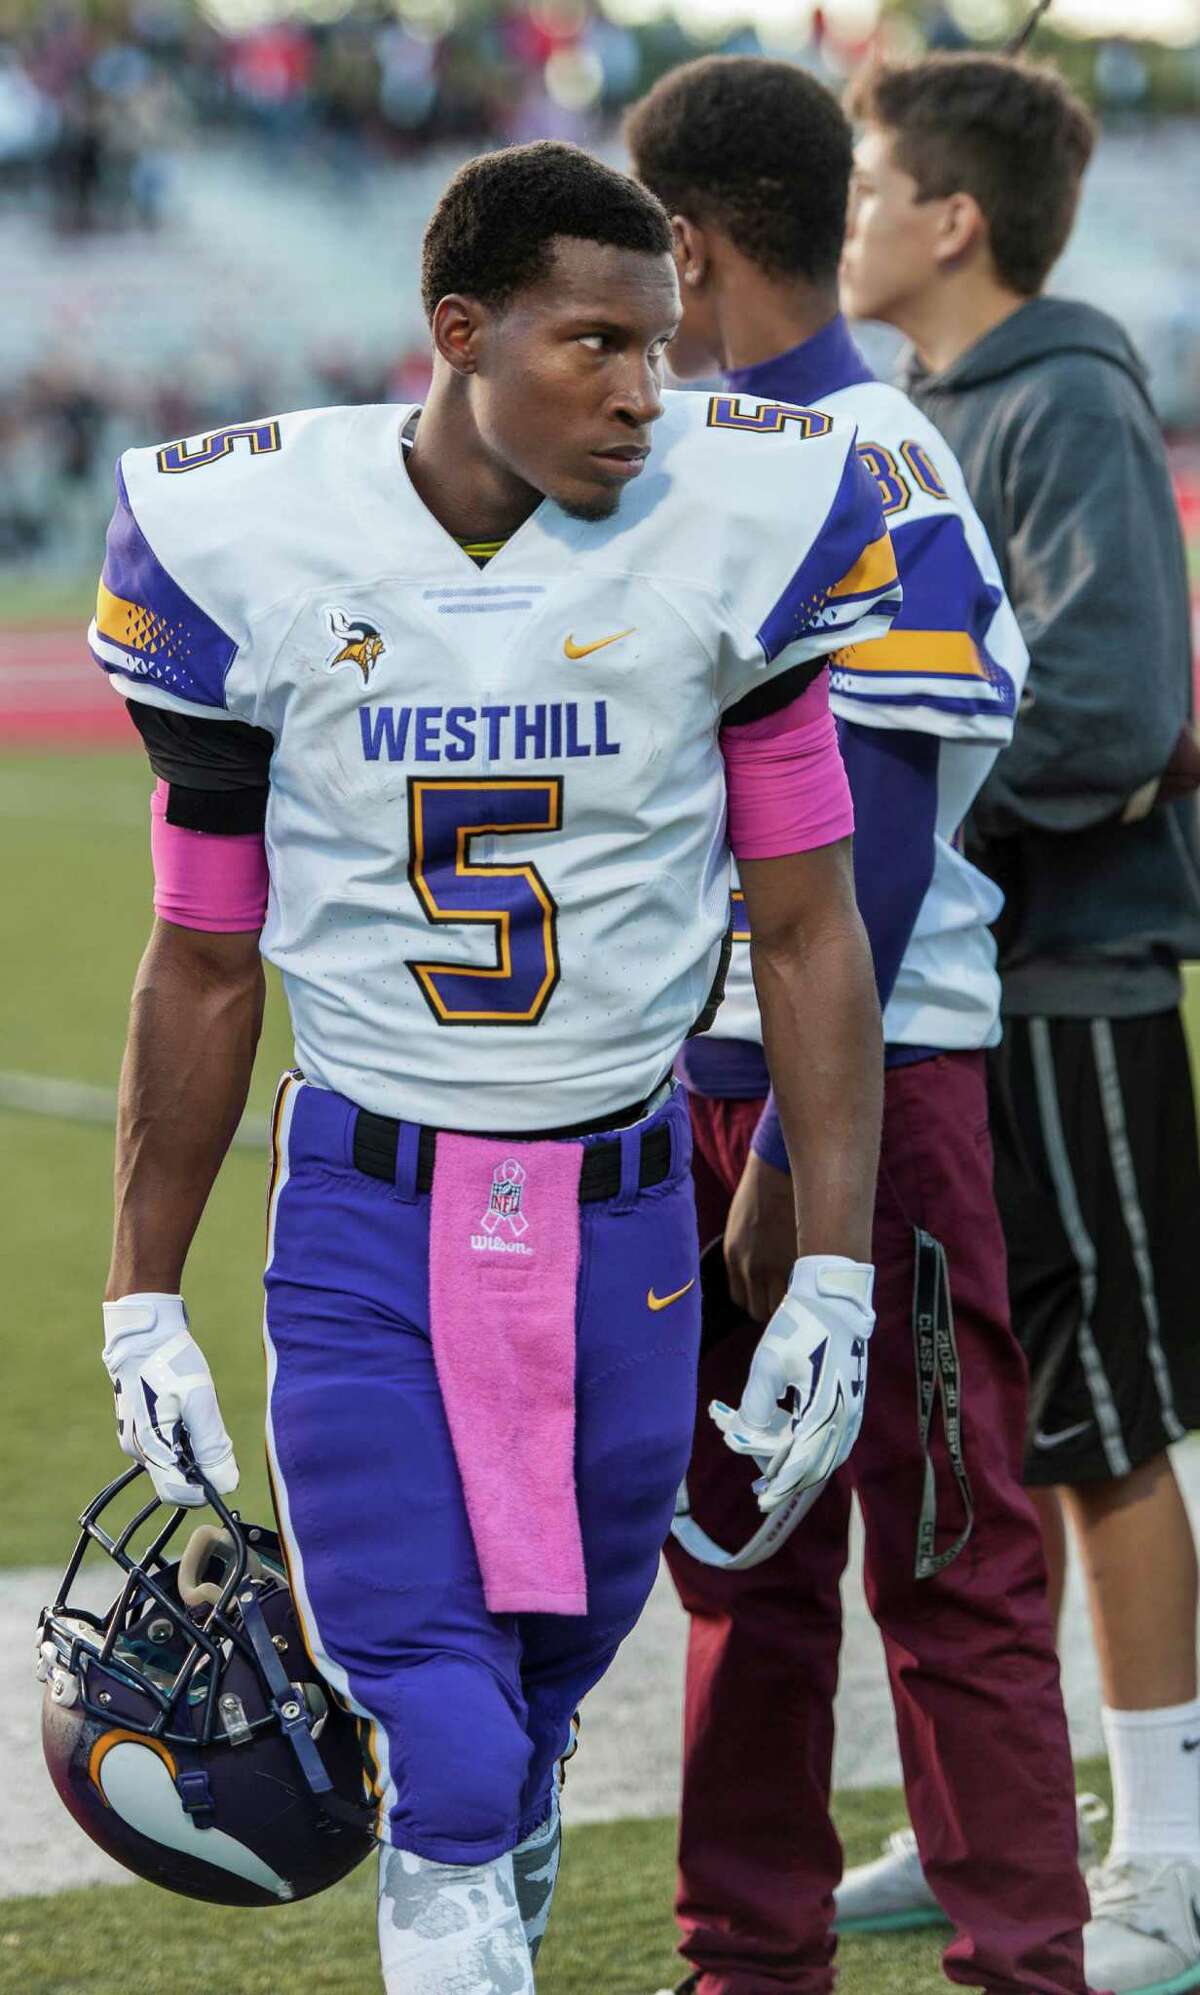 Westhill High Schools Aaron Pettiford on the sidelines prior to a football game against New Canaan High School played at New Canaan High School, New Canaan, CT on Monday, October 5, 2015.